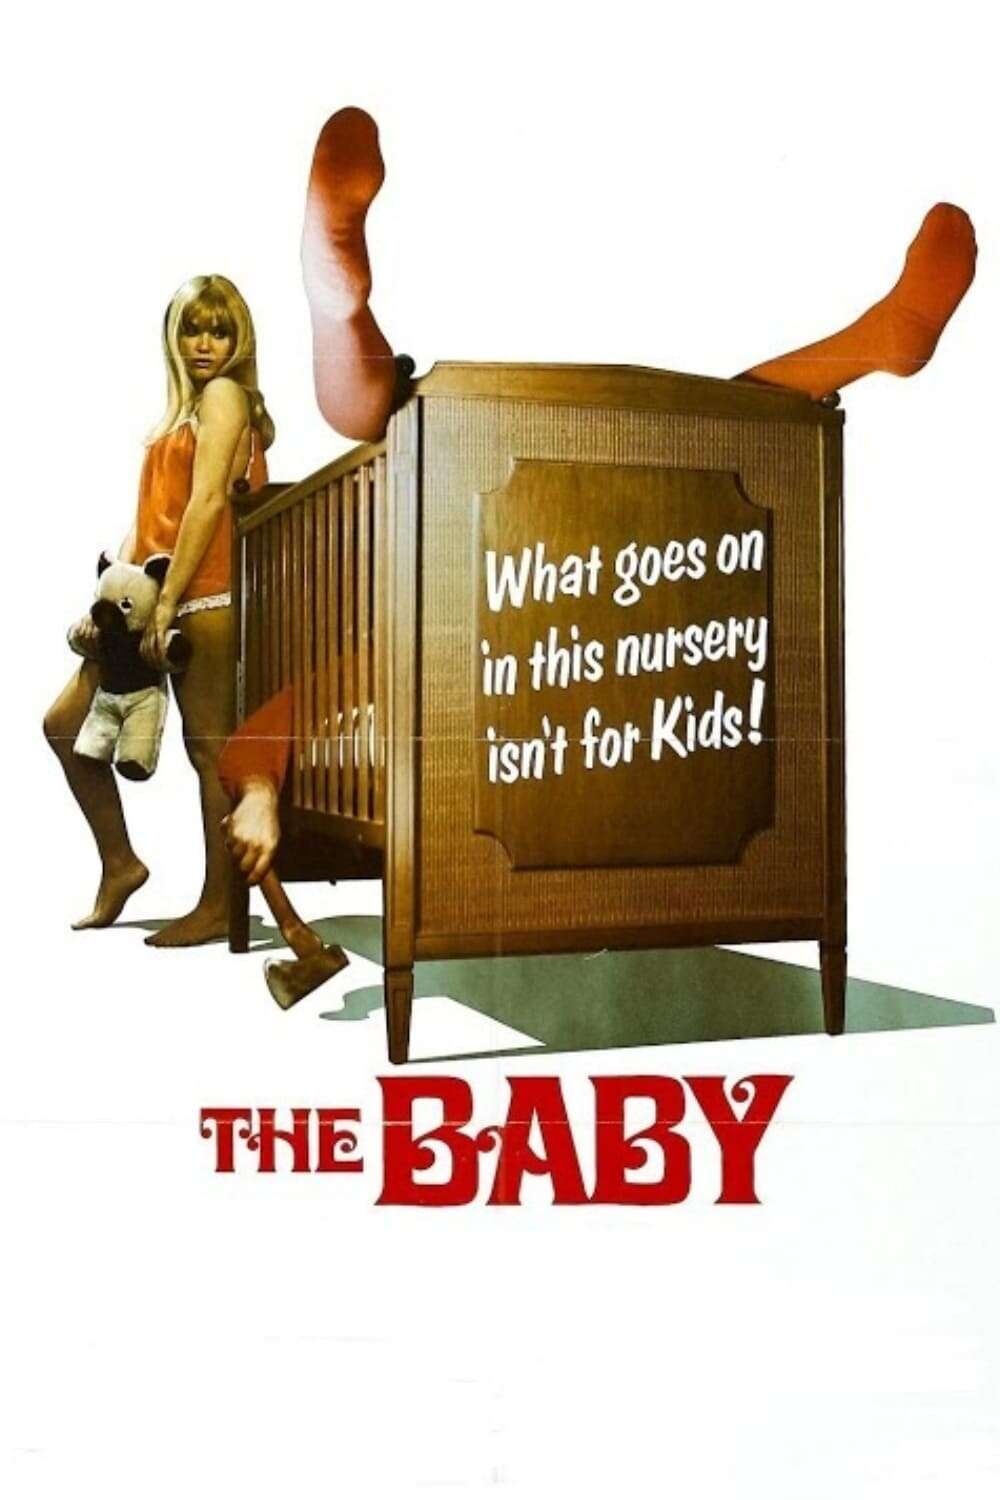 A poster for the 1973 shocker, The Baby